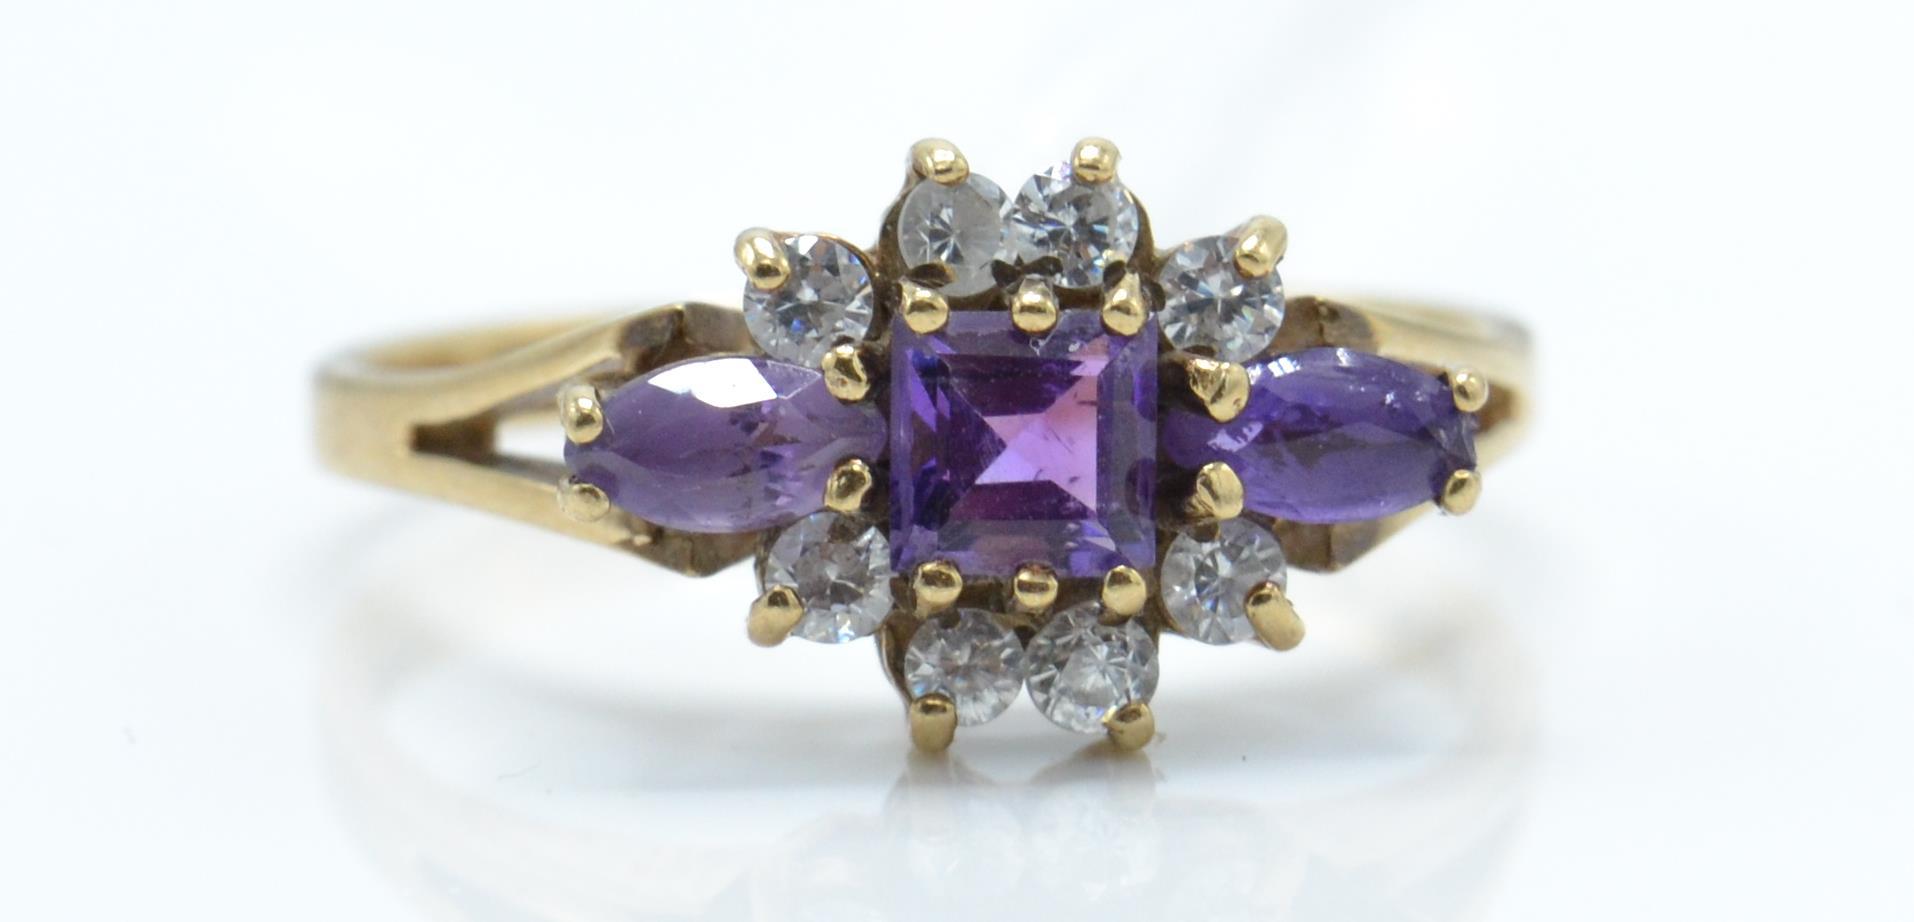 A hallmarked 9ct gold amethyst and white stone cluster ring. The ring set with 3 graduating